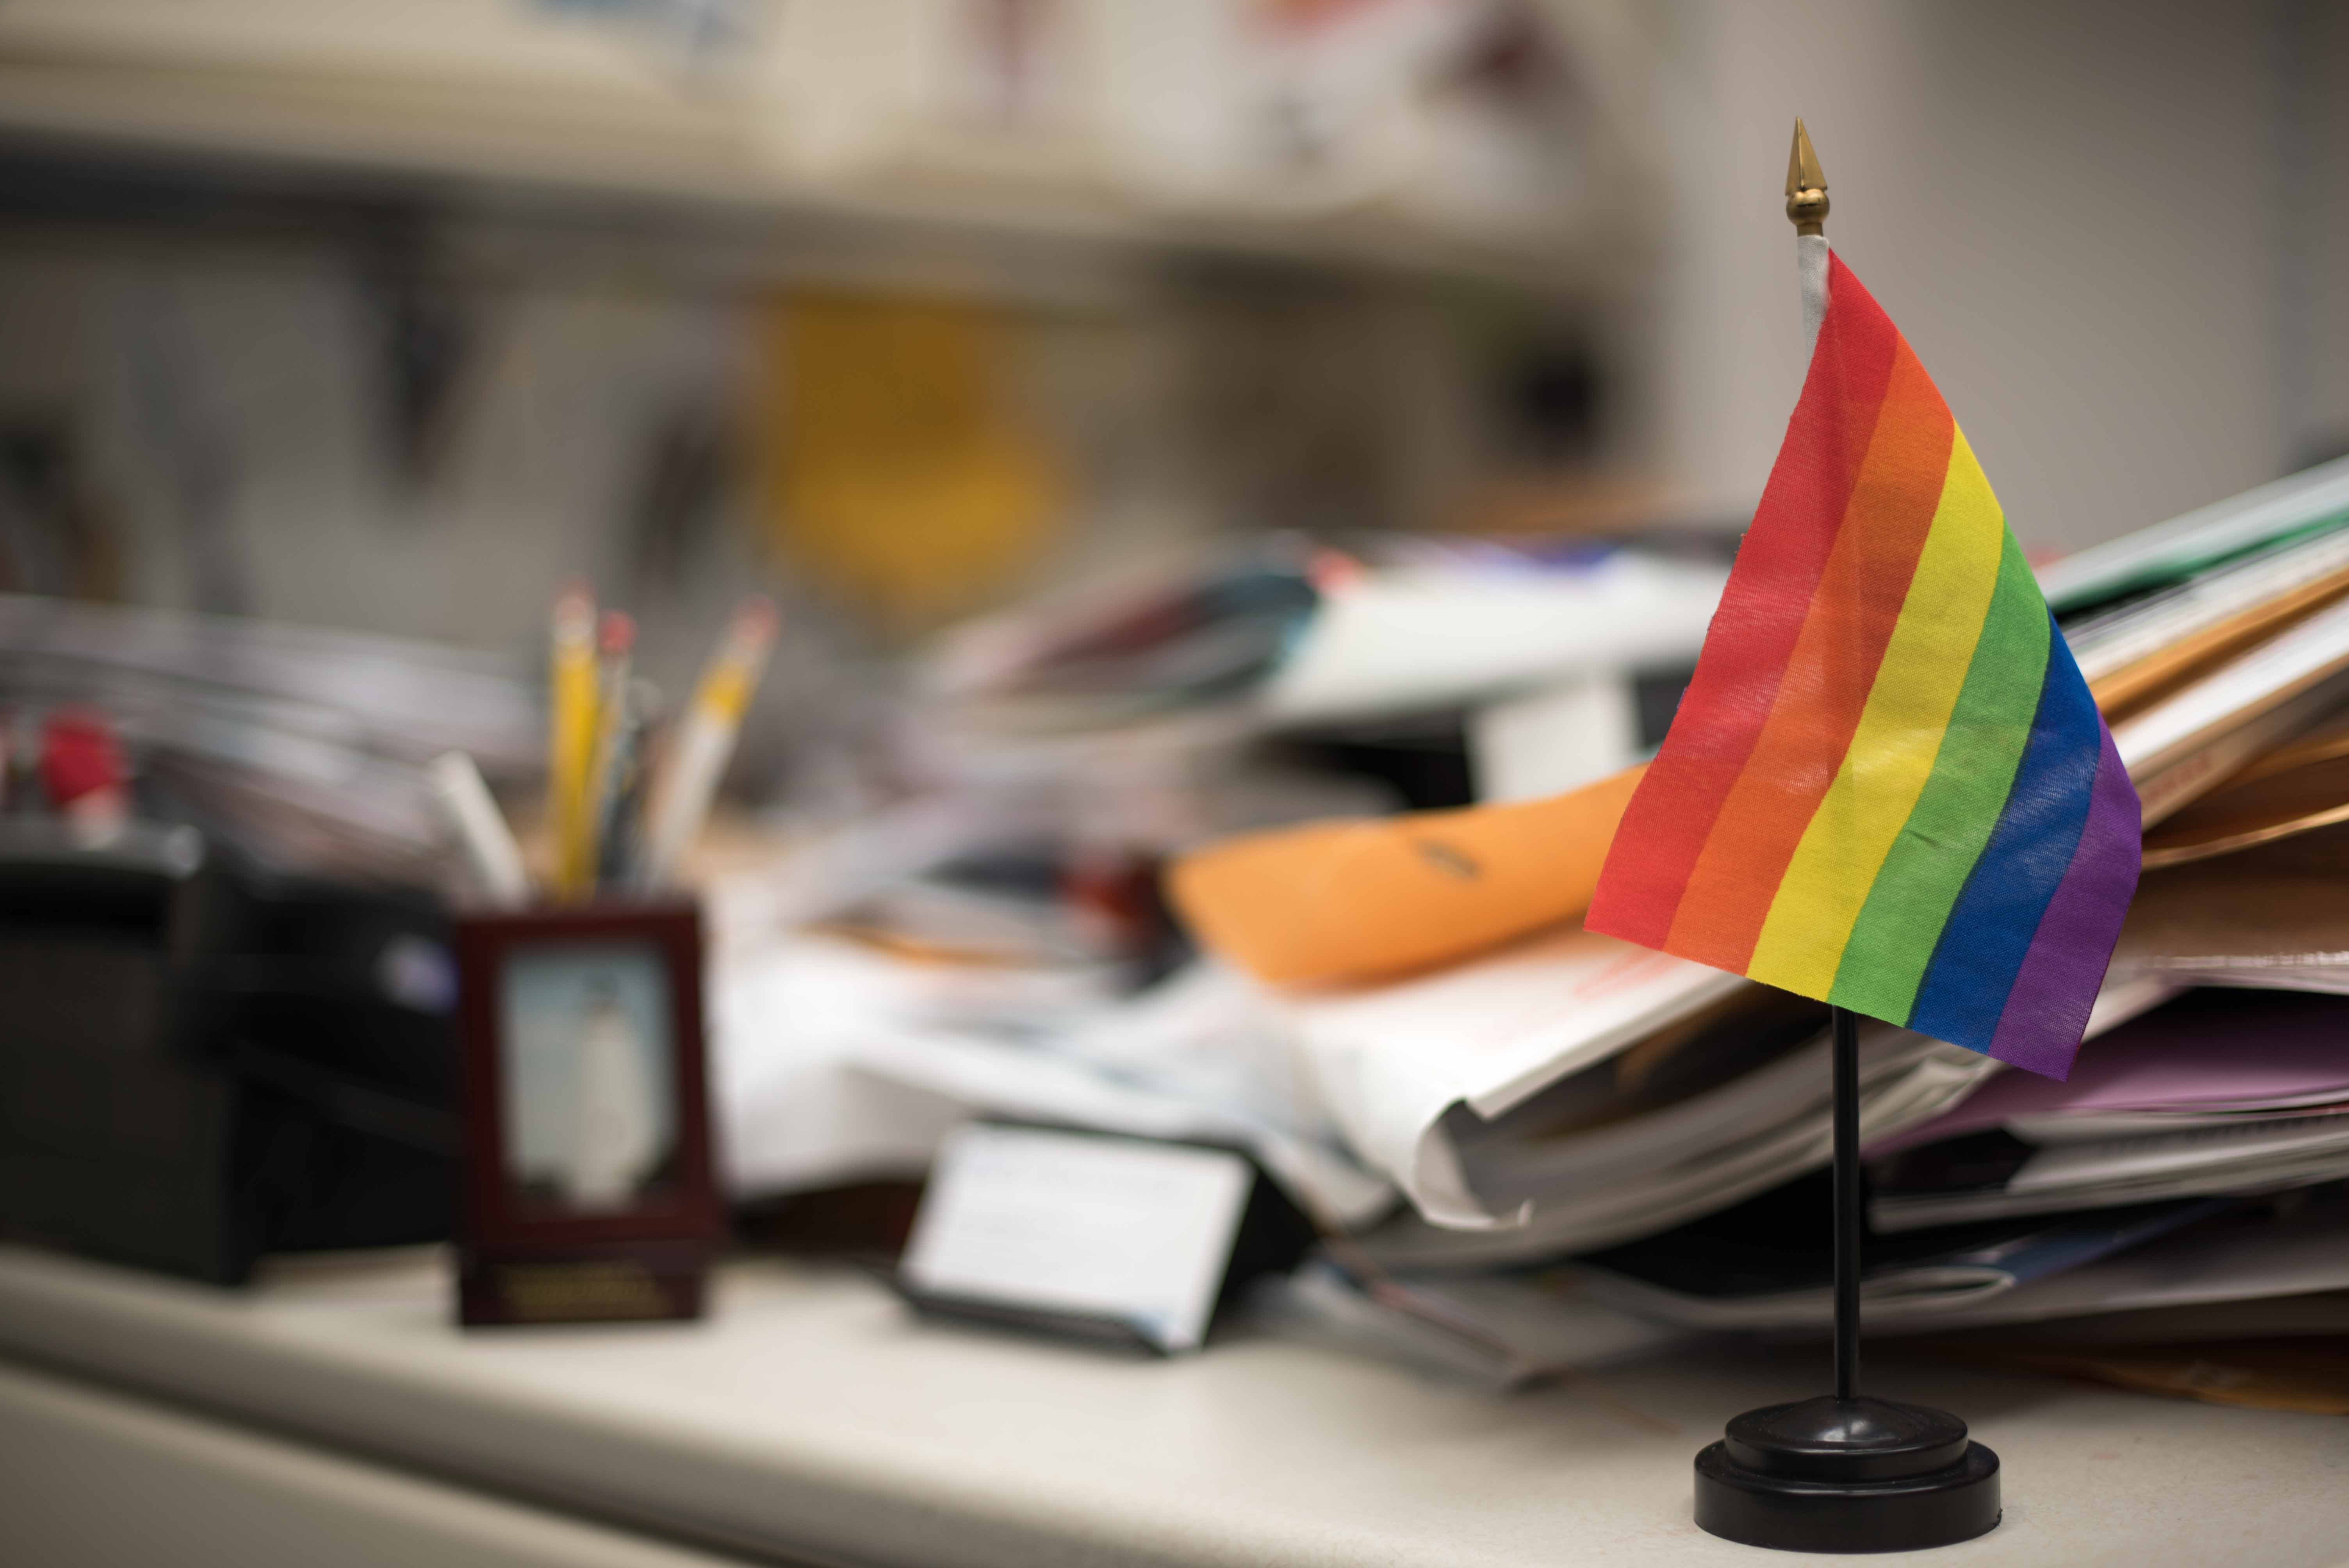 Commentary: Workplaces should advocate for LGBT diversity